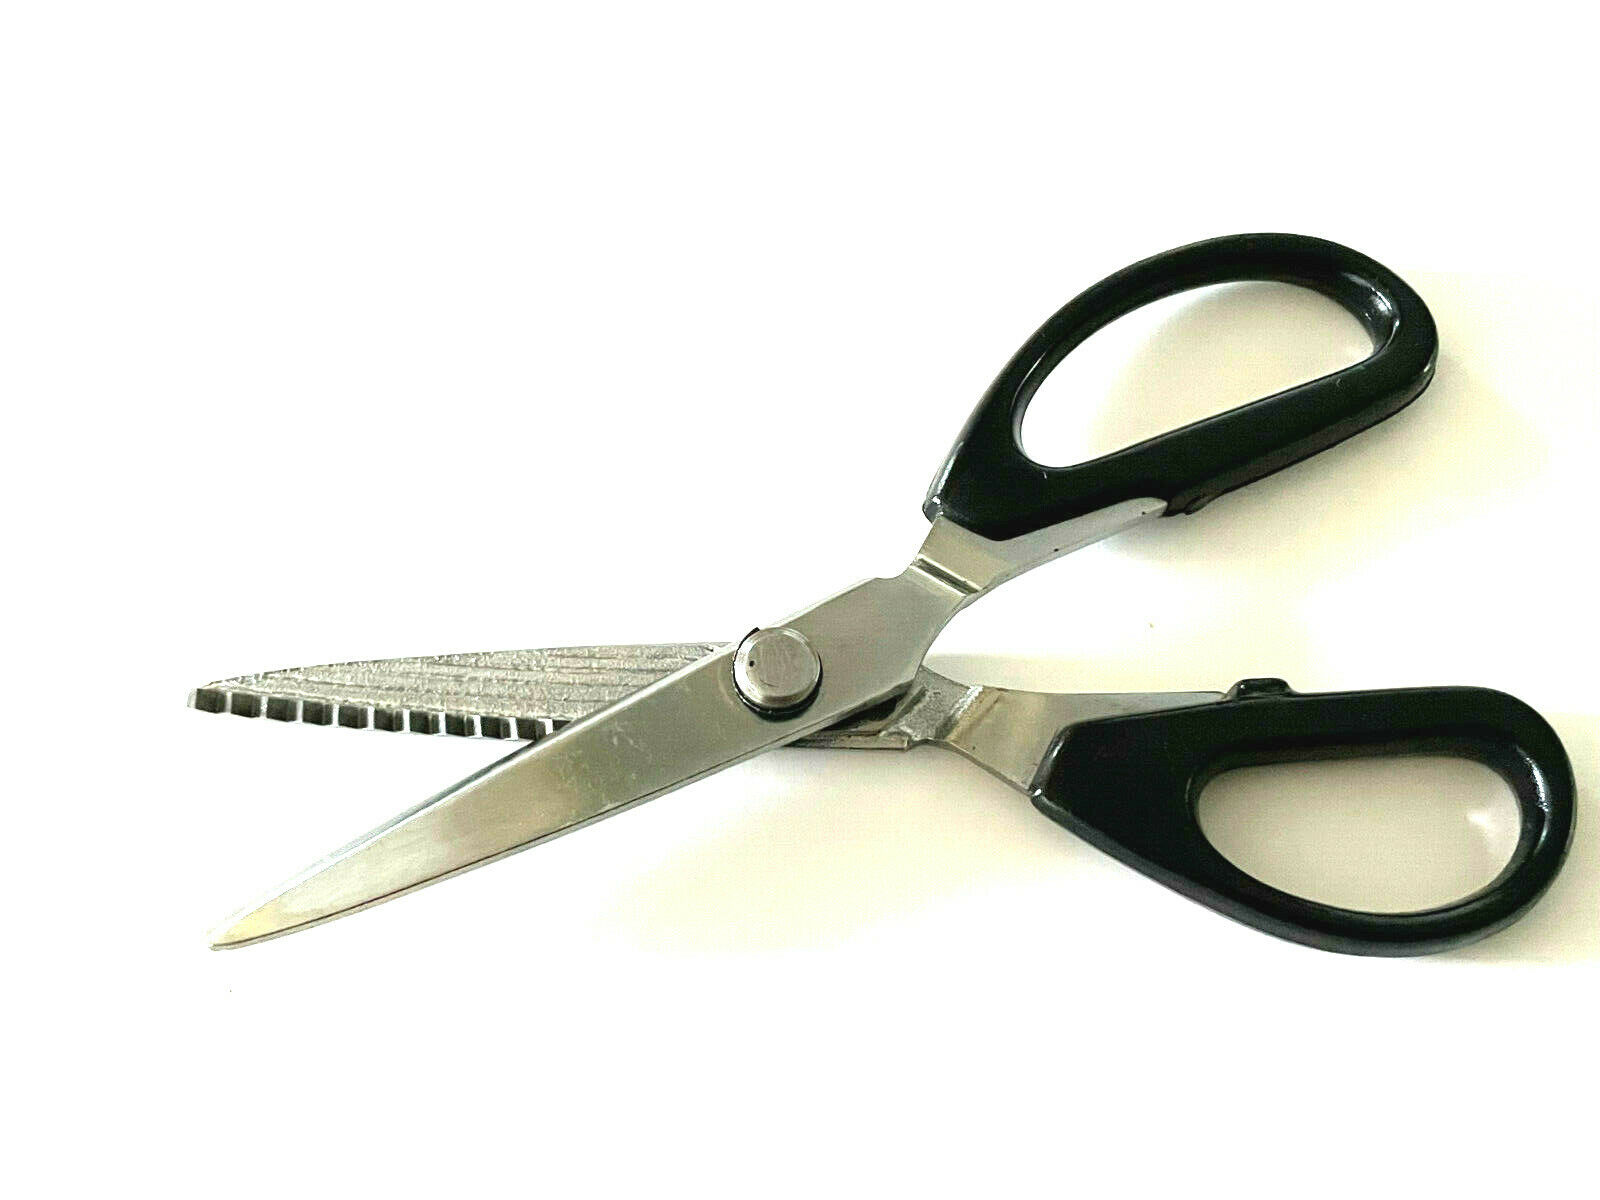 Professional Sewing Scissors Set - Pinking, Embroidery, & Fabric Shear - 1  Set